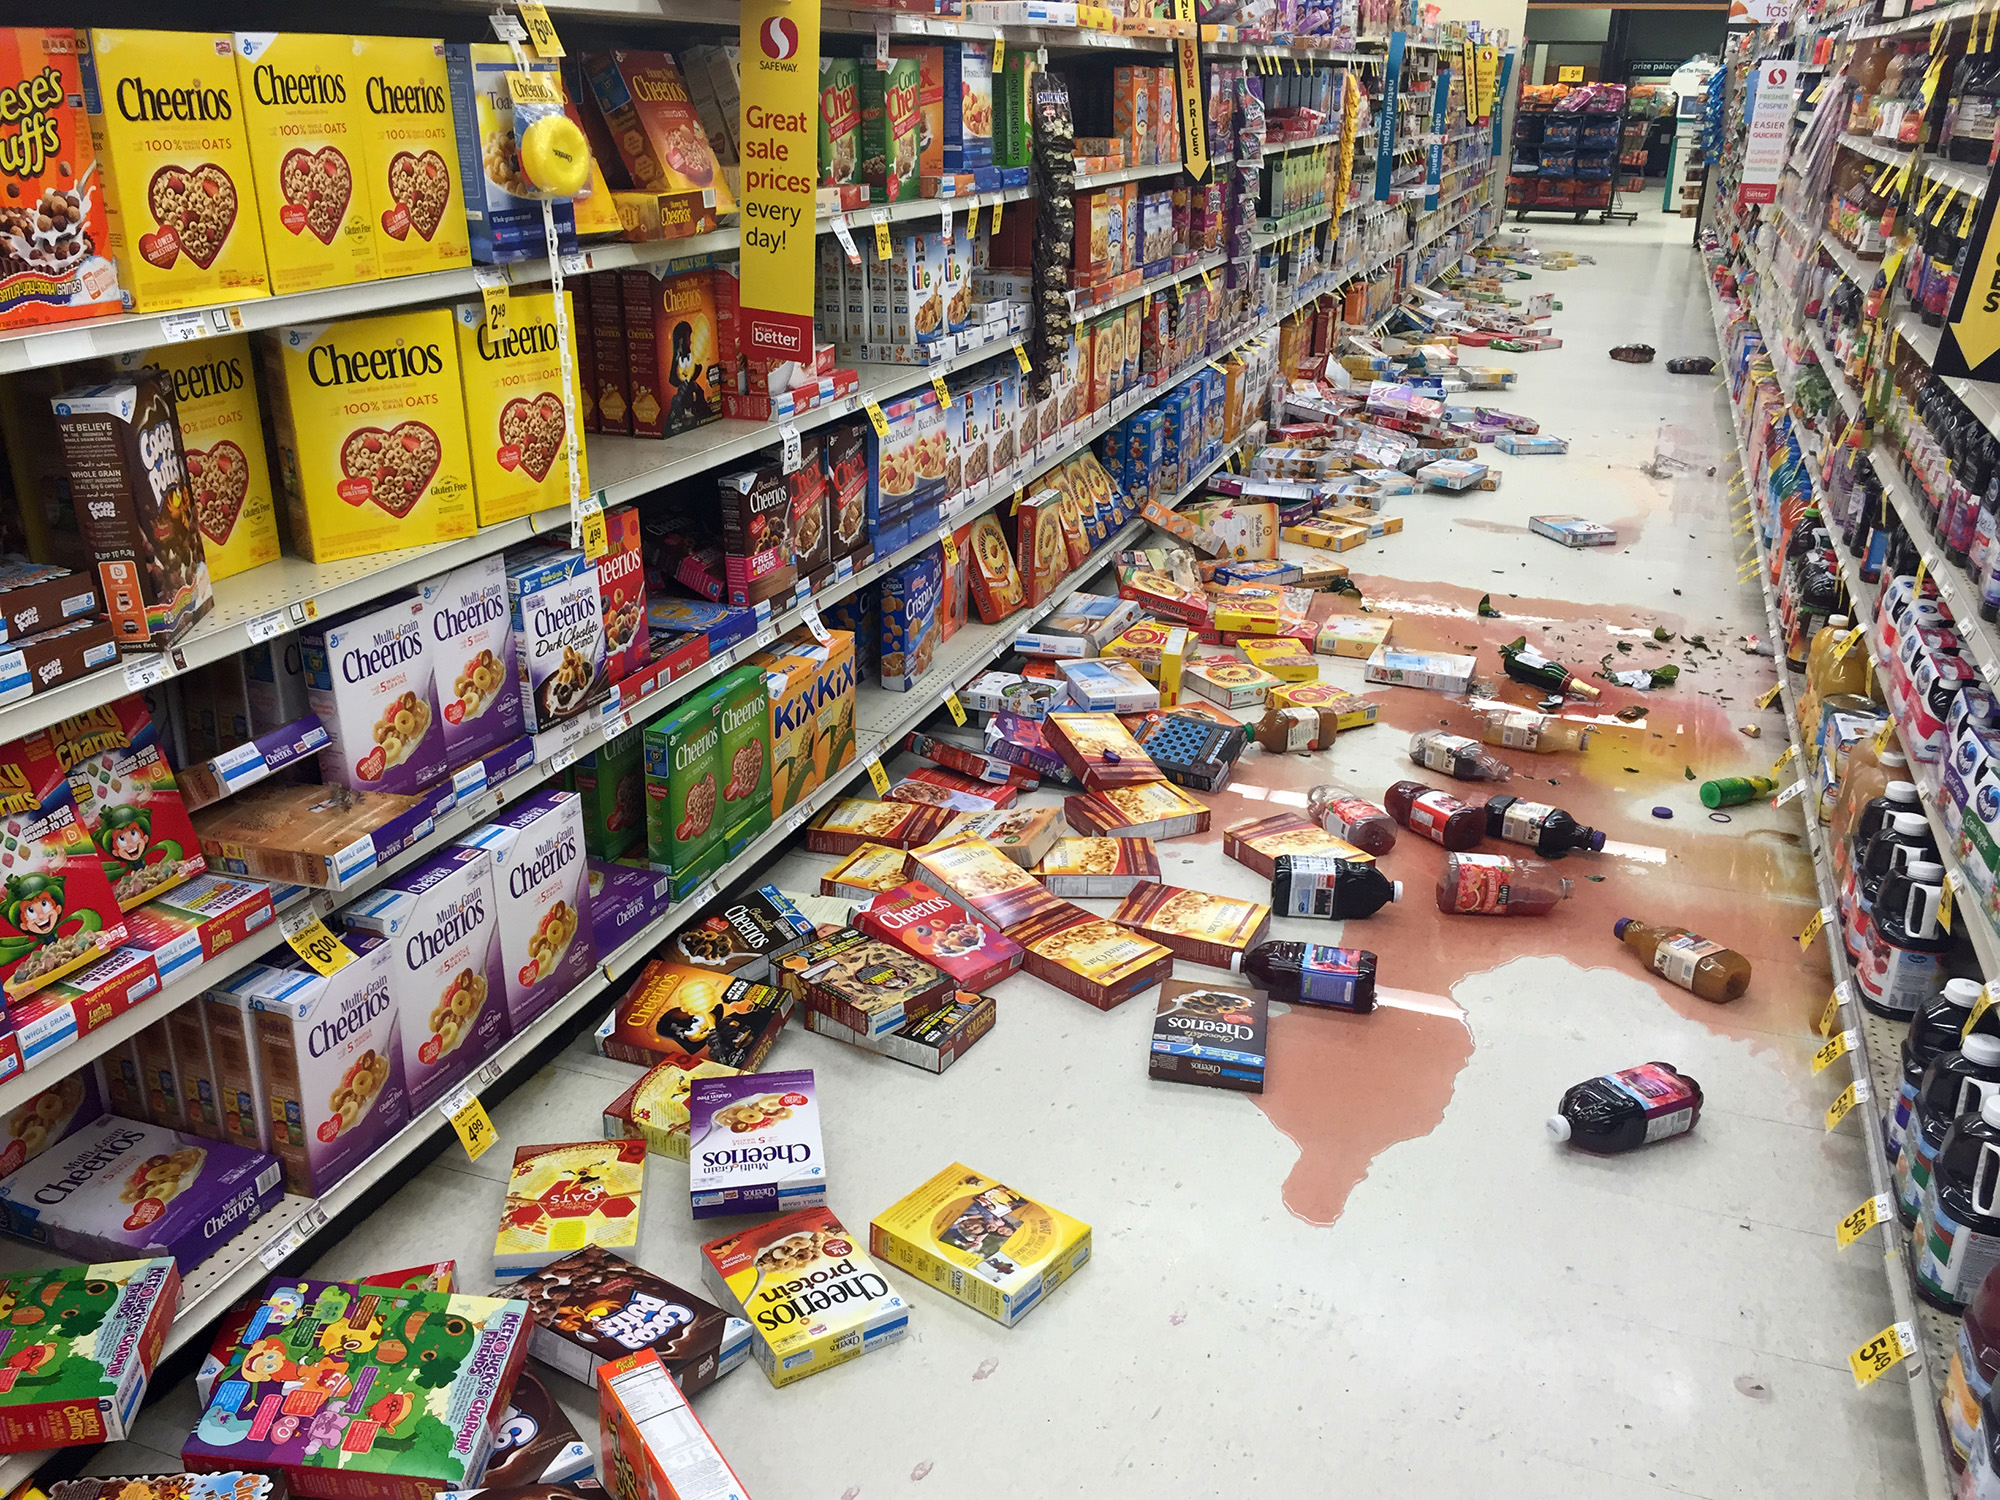 Boxes of cereal and bottles of juice lie on the floor of a Safeway grocery store following an earthquake on the Kenai Peninsula in Alaska on Jan. 24, 2016.